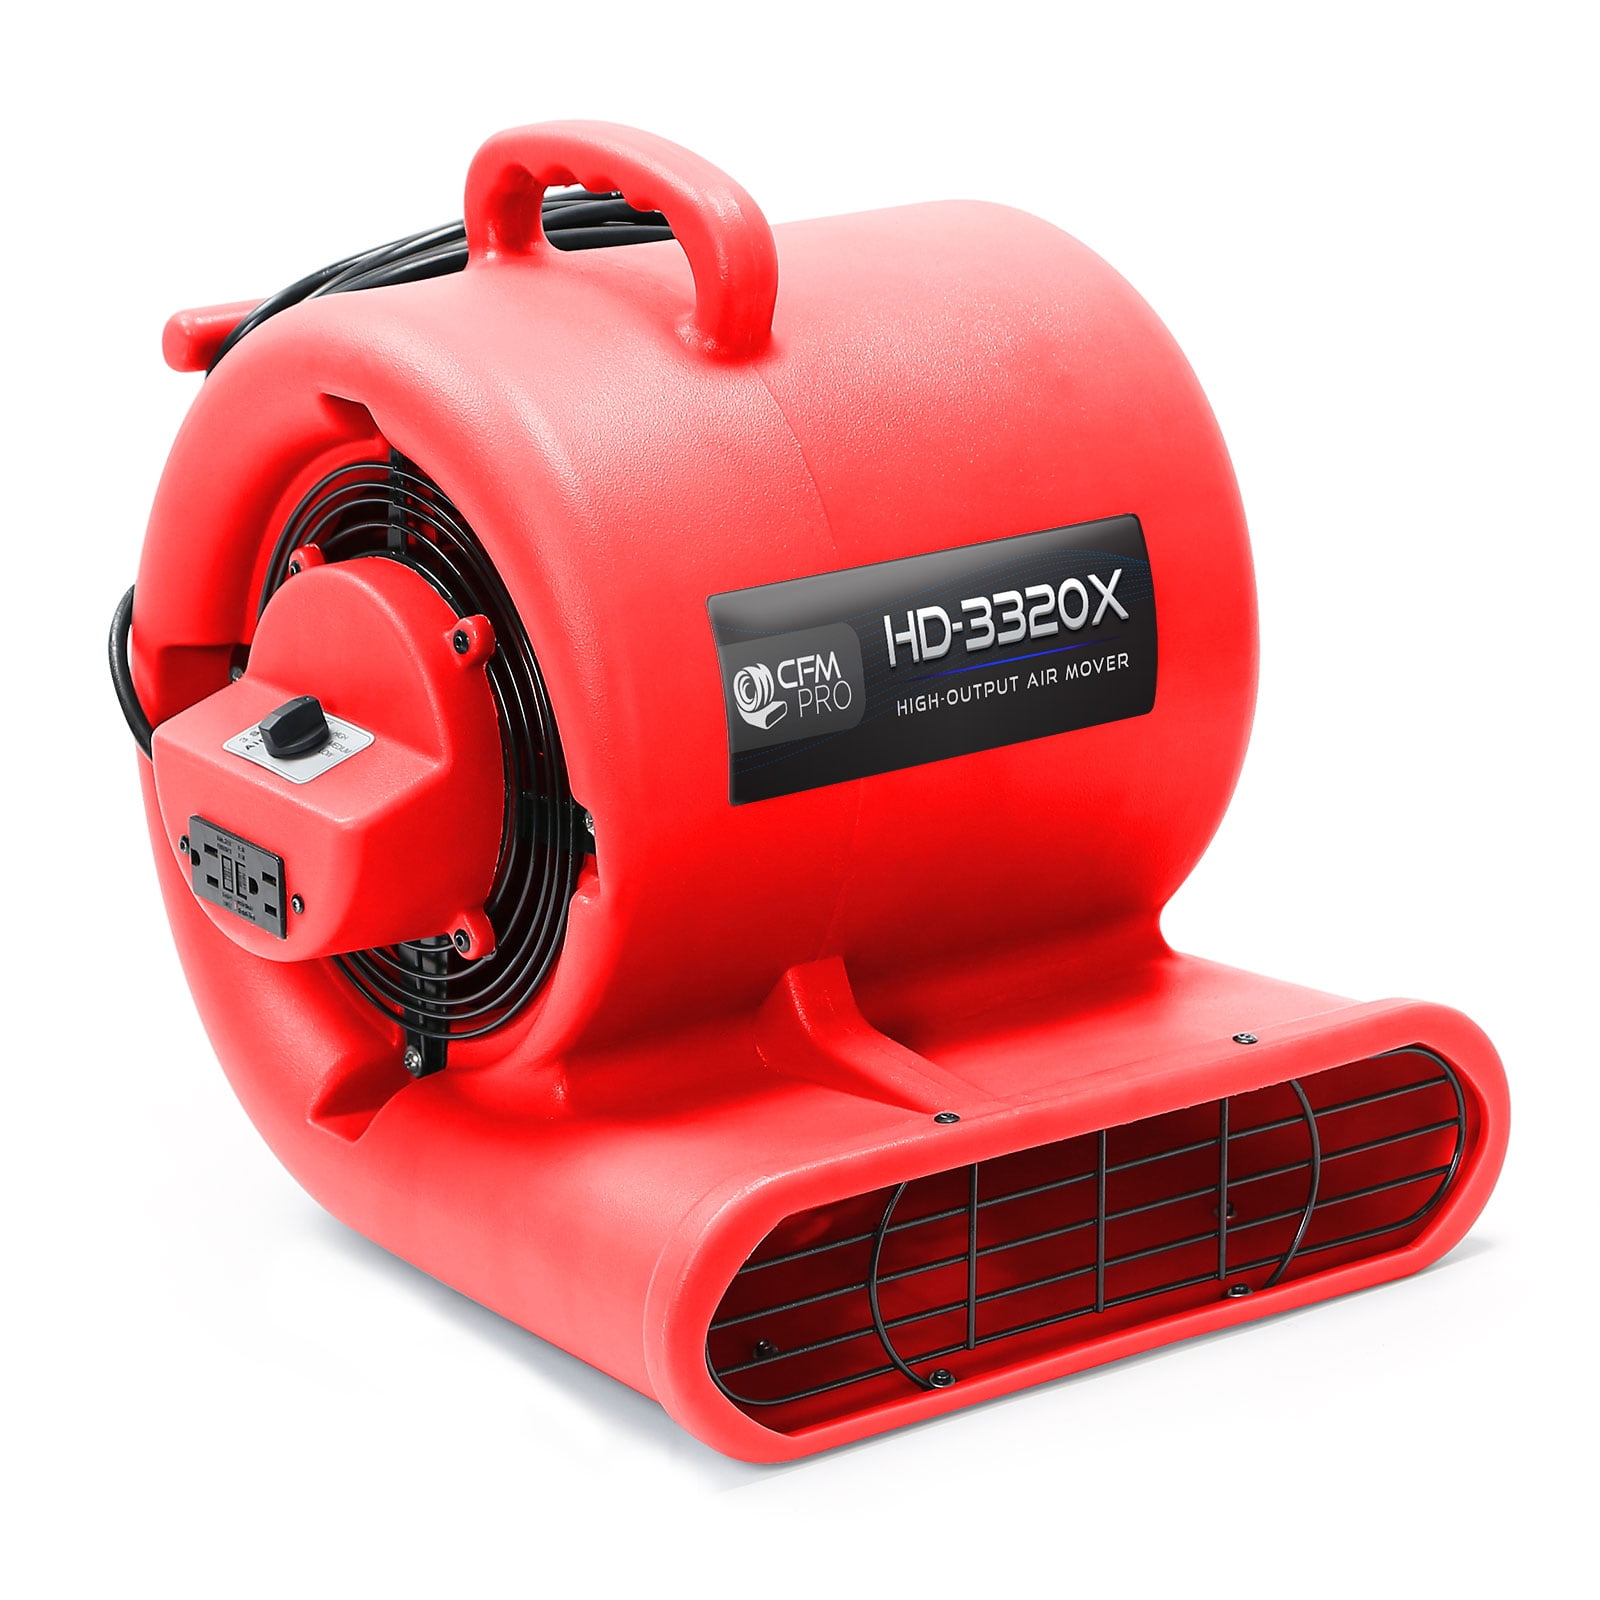 CFM PRO Air Mover Carpet Floor Dryer 3 Speed 1/3 HP Blower Fan with 2